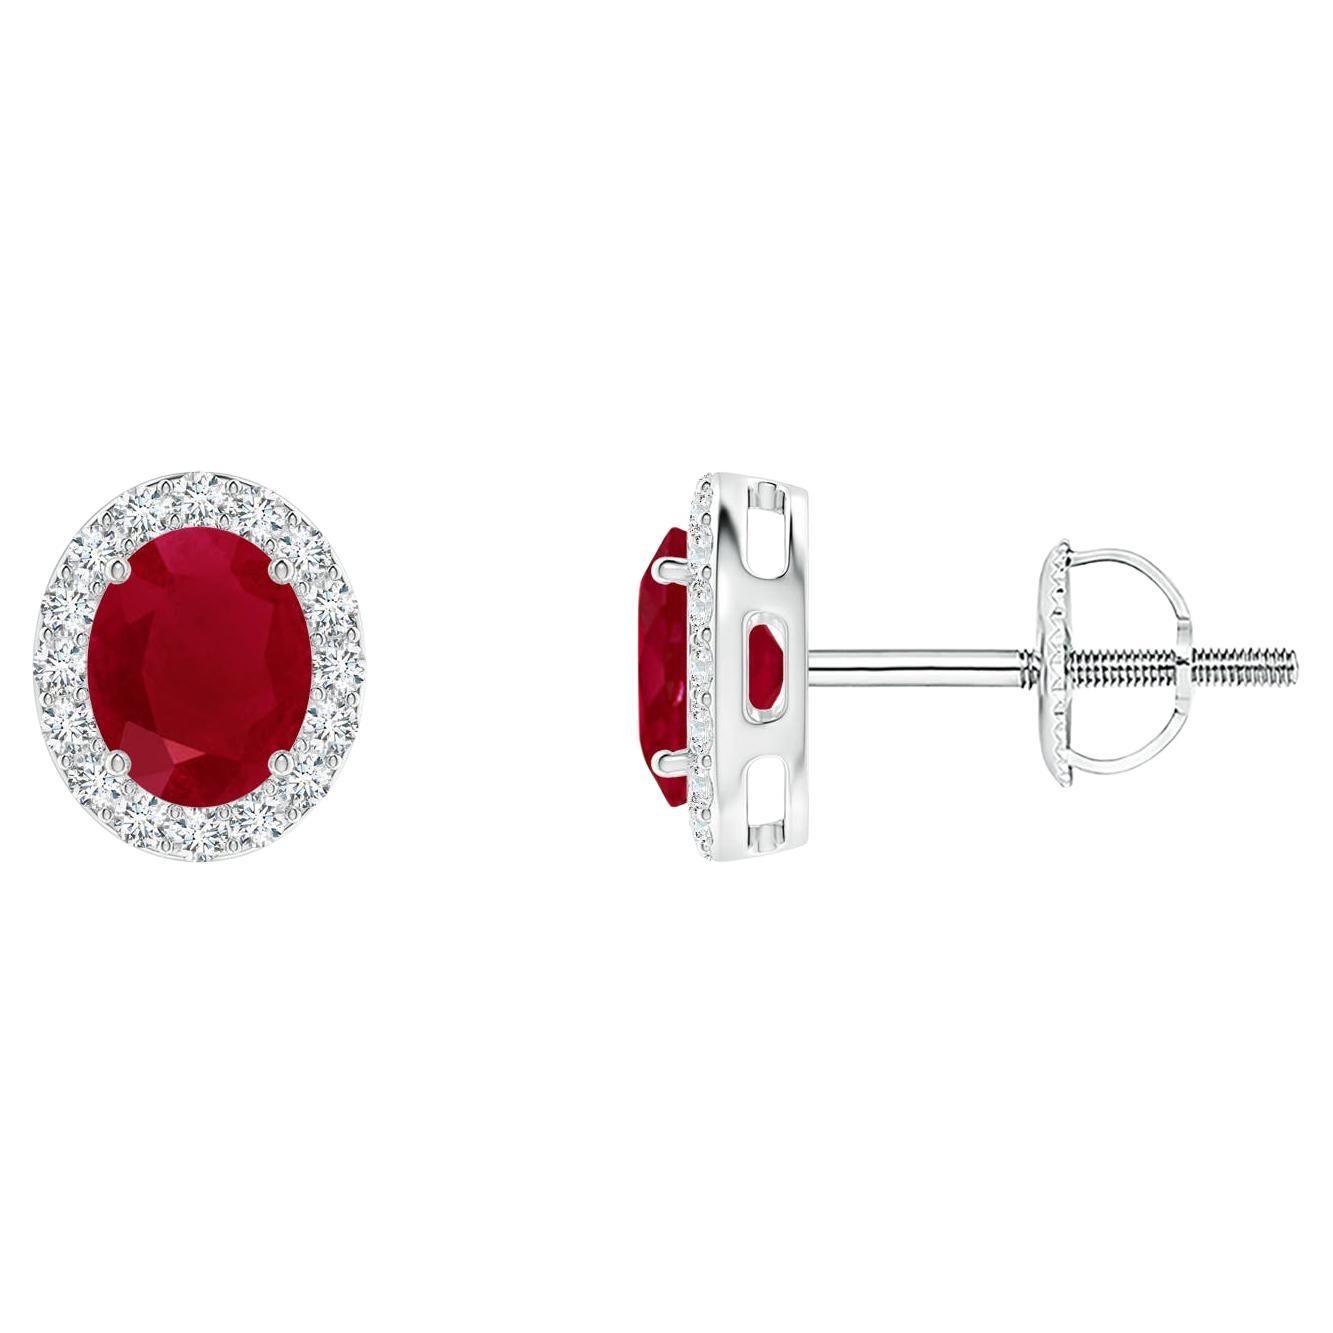 ANGARA Natural Oval 0.80ct Ruby Studs with Diamond Halo in Platinum